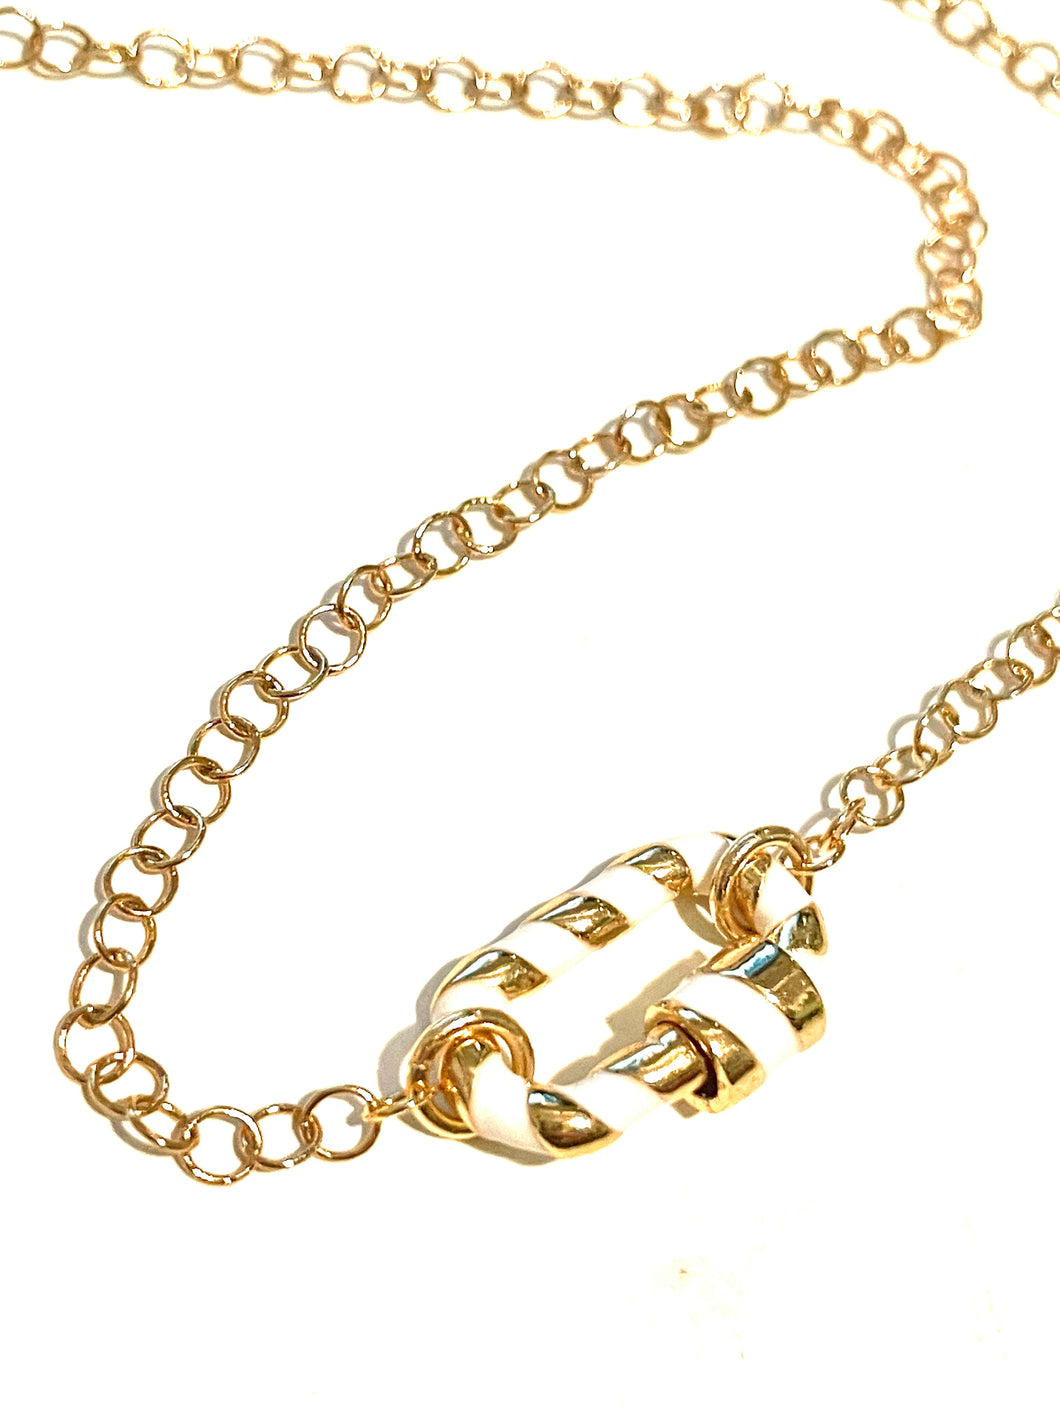 Necklace | Gold and White Striped Carabiner